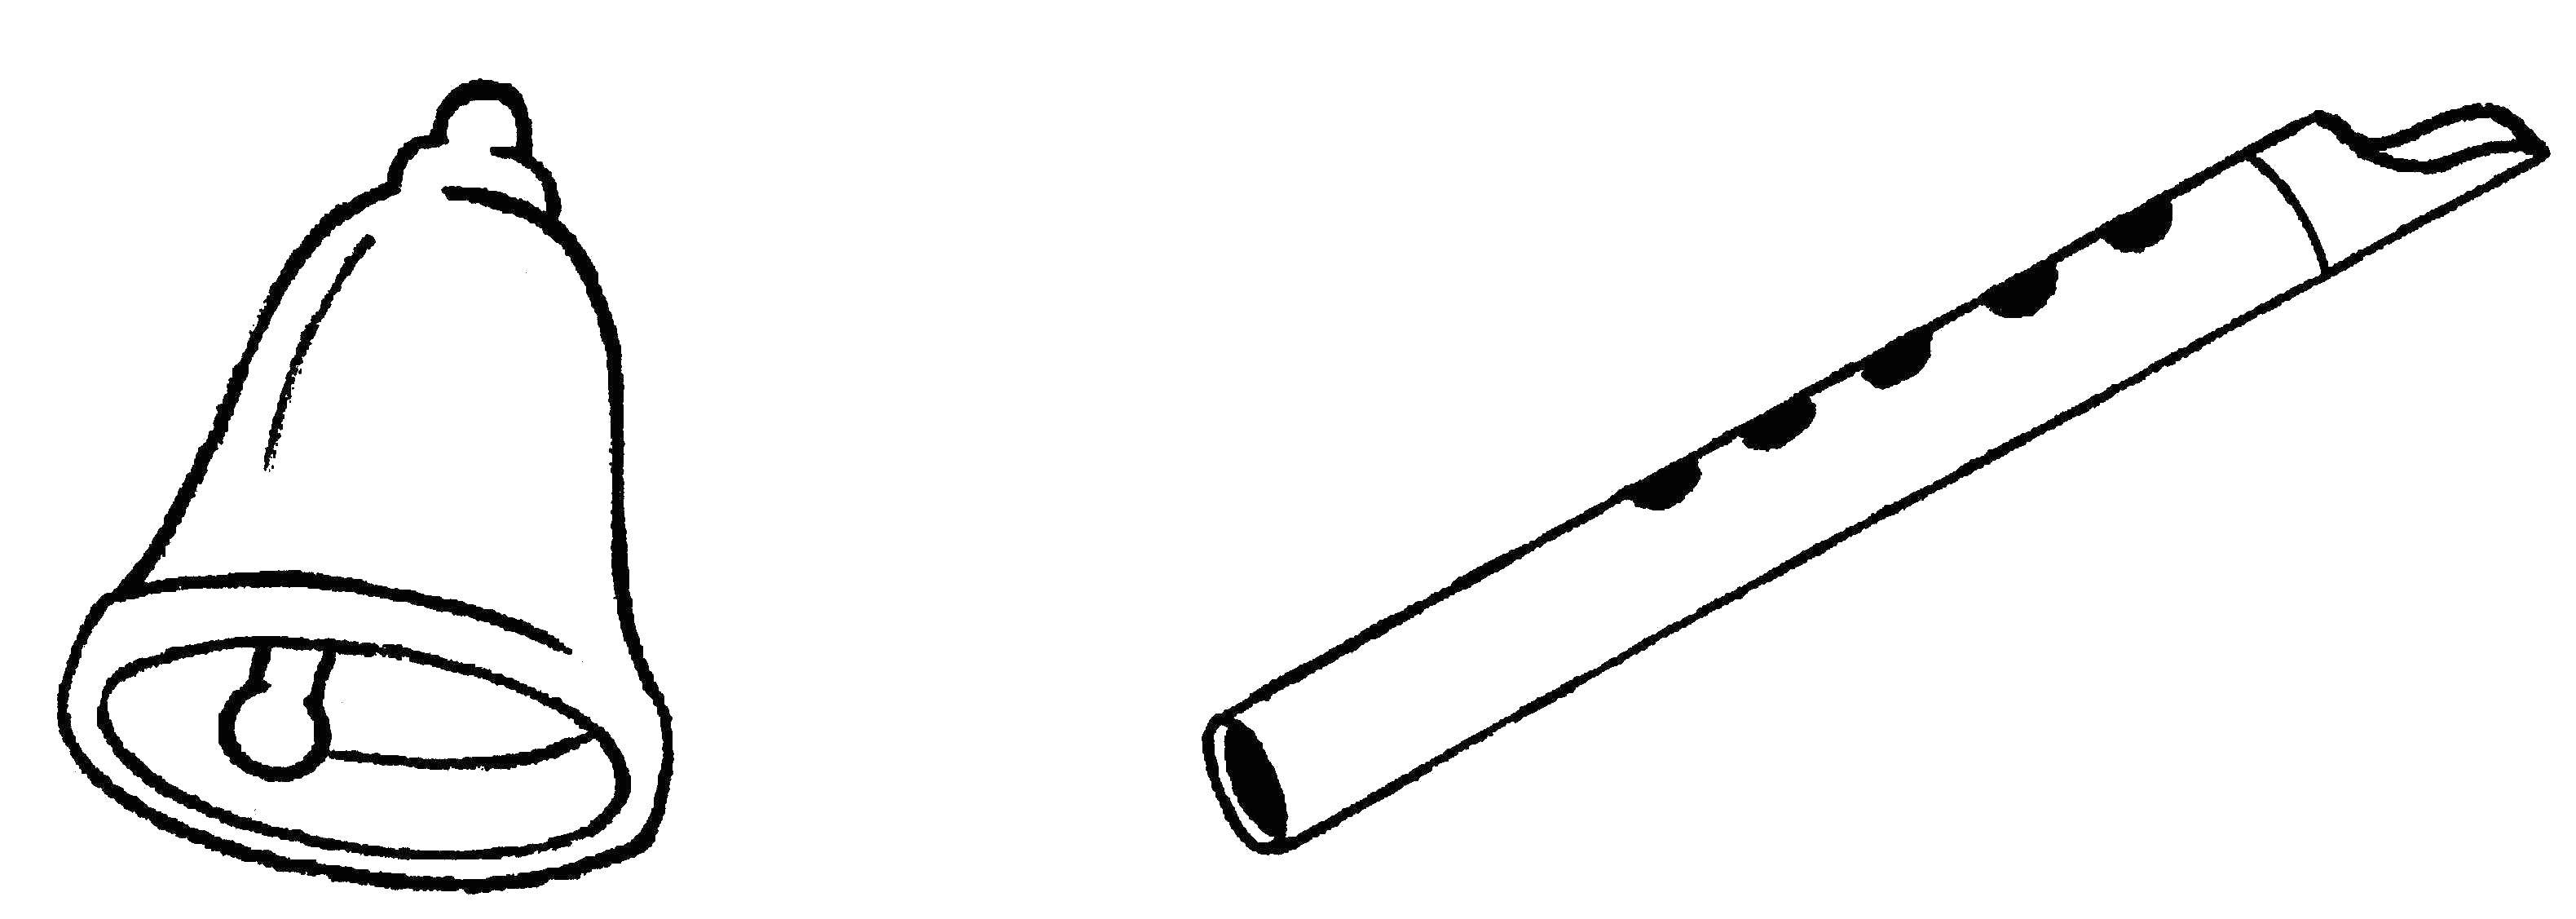 Coloring Flute with a bell. Category flute. Tags:  flute, music.